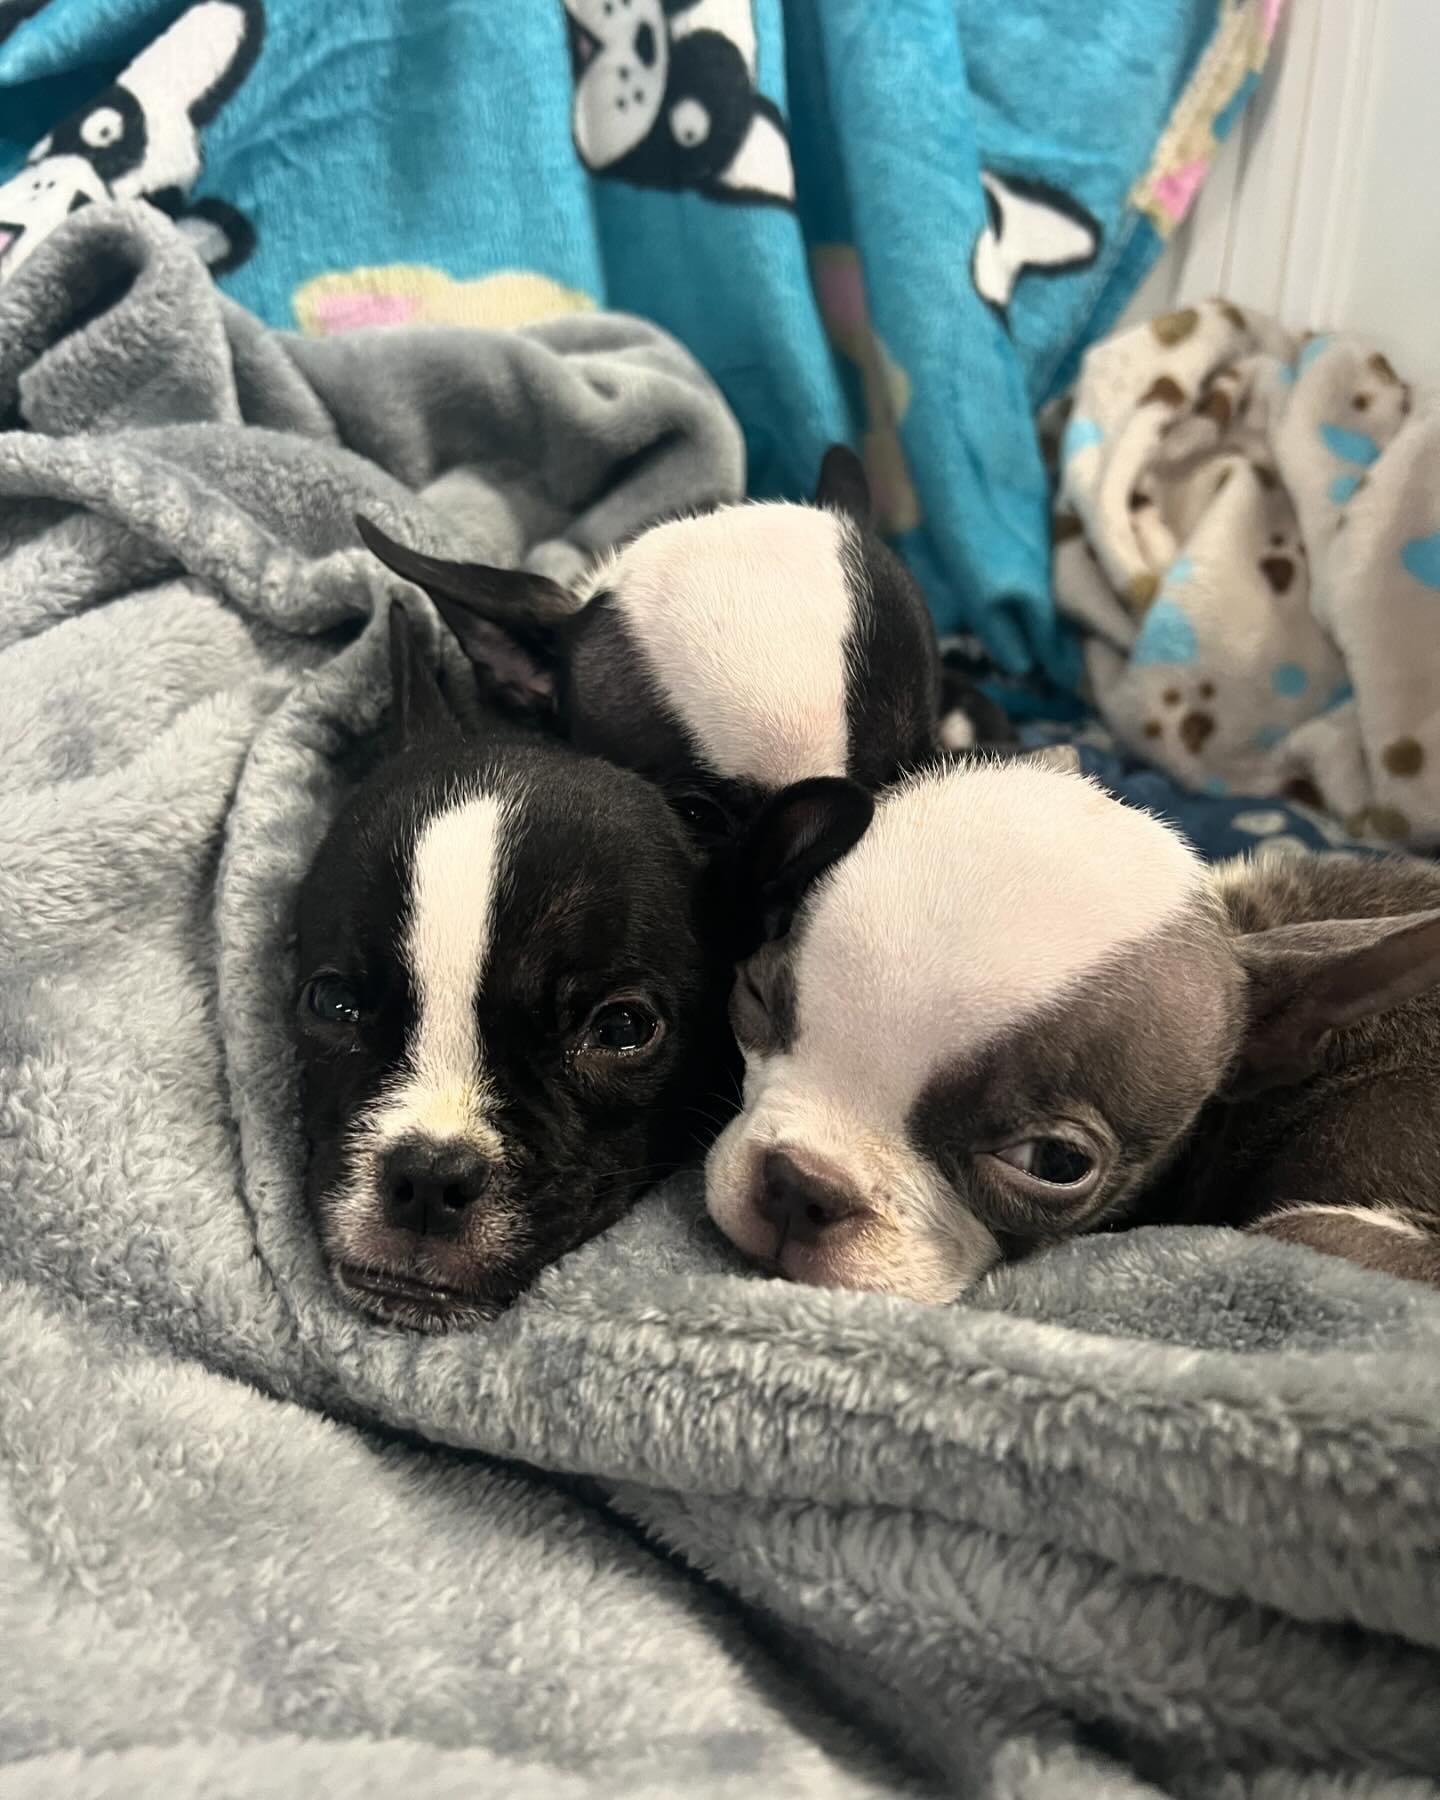 puppies lying on a gray blanket